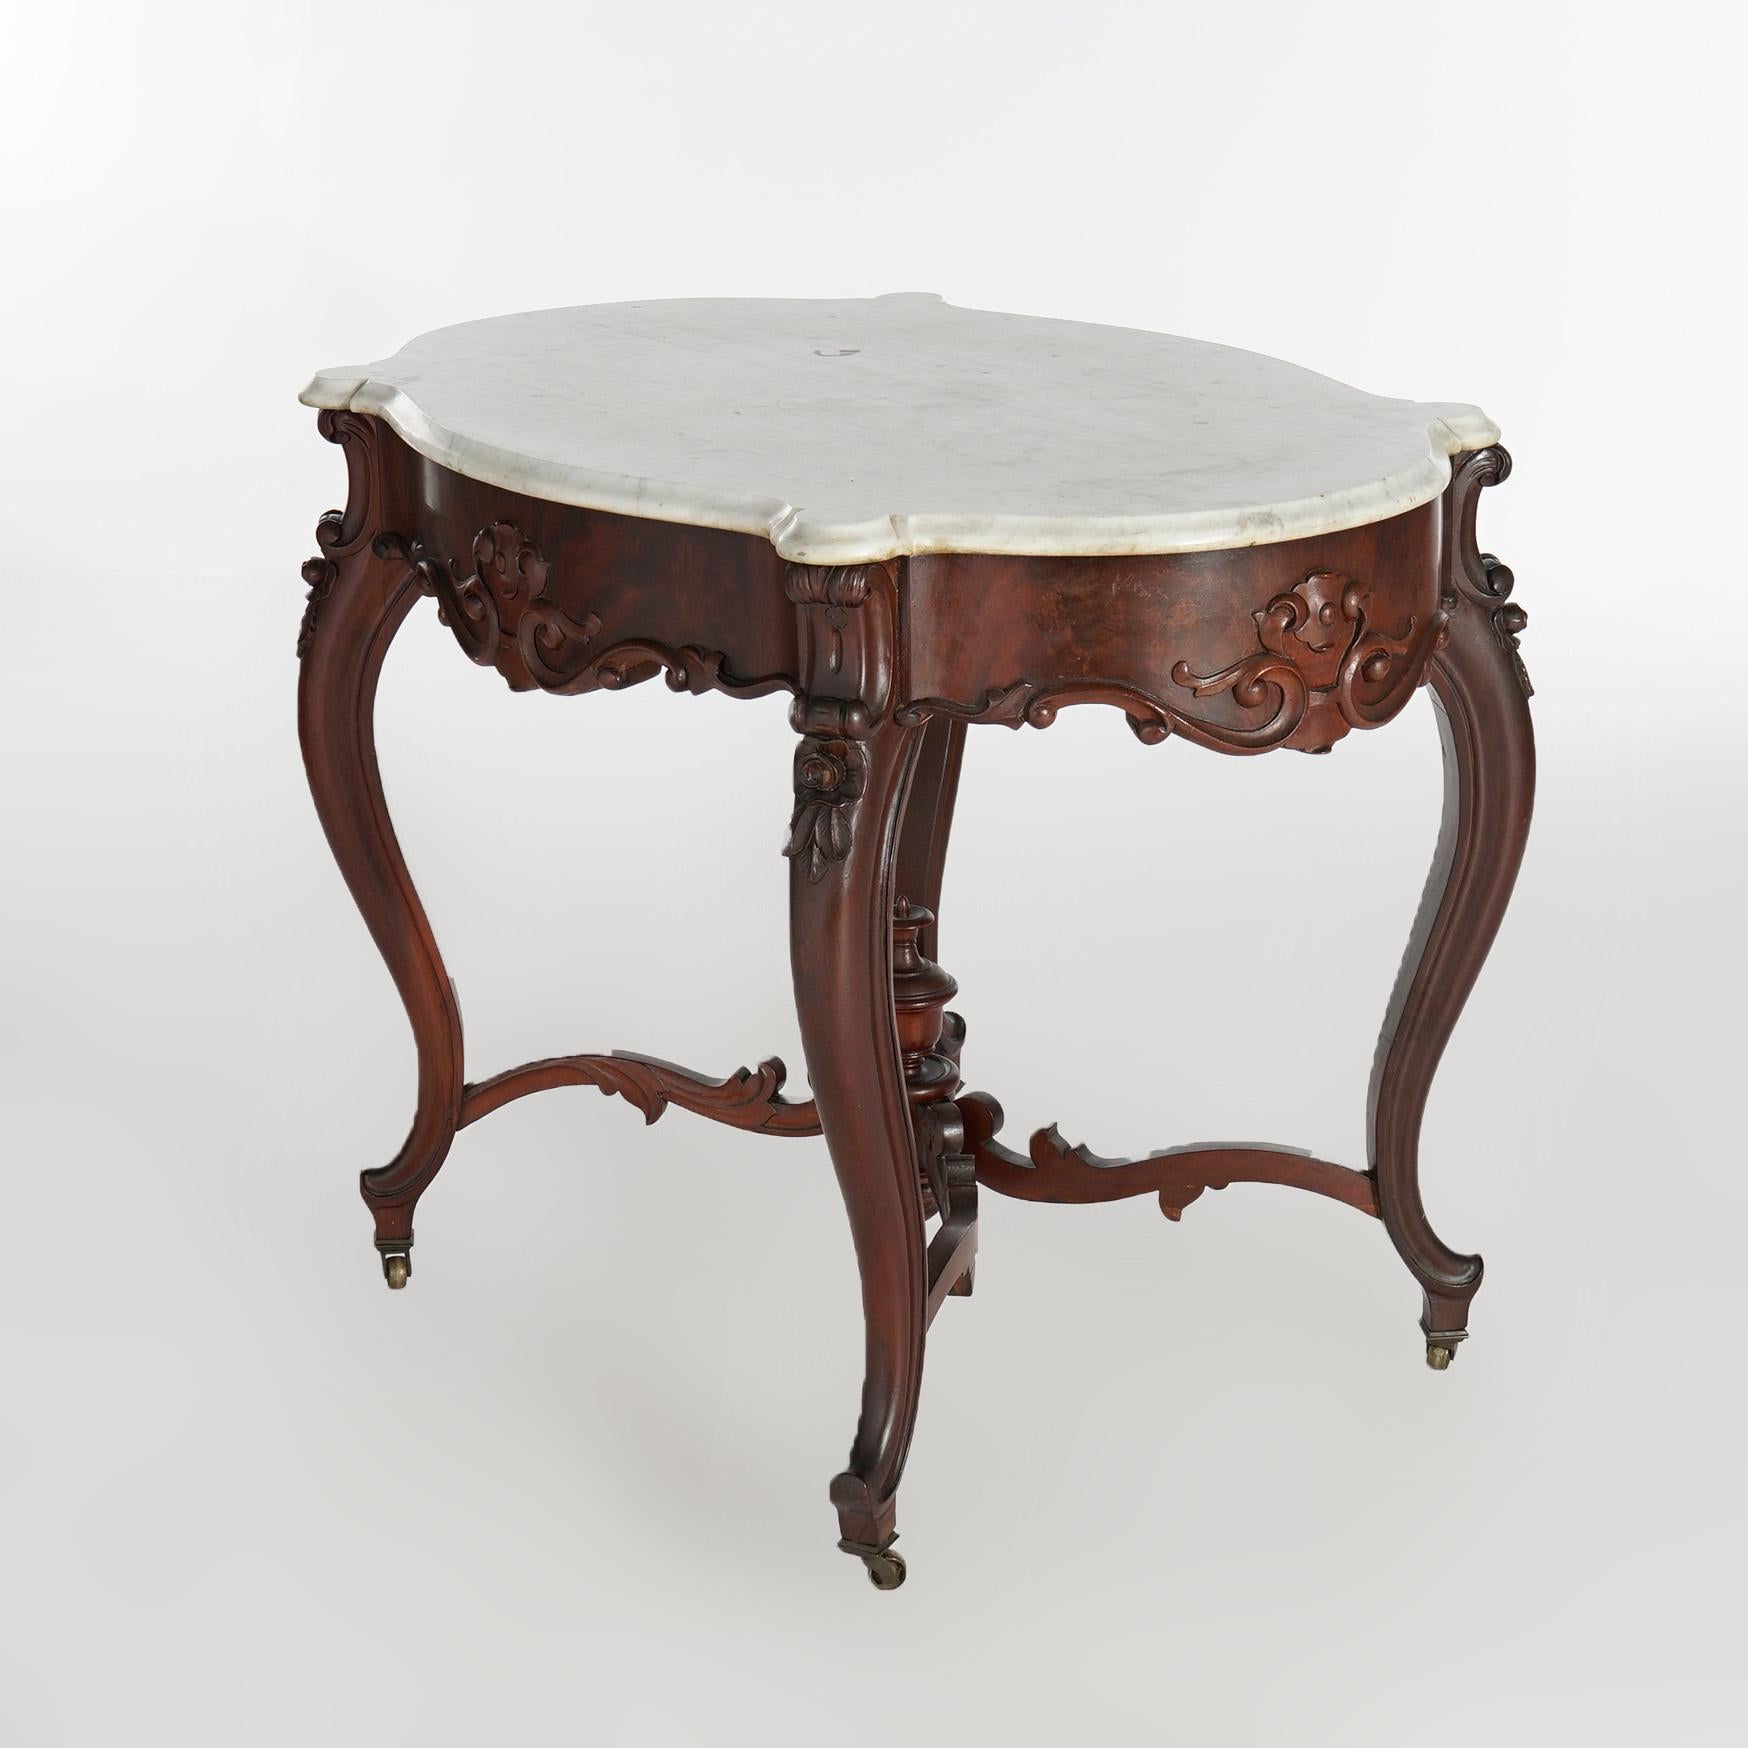 An antique Rococo parlor center table offers shaped and beveled marble turtle top over flame mahogany base having scroll and foliate elements, raised on cabriole legs with central urn form finial, c1880.

Measures- 29.5''H x 38''W x